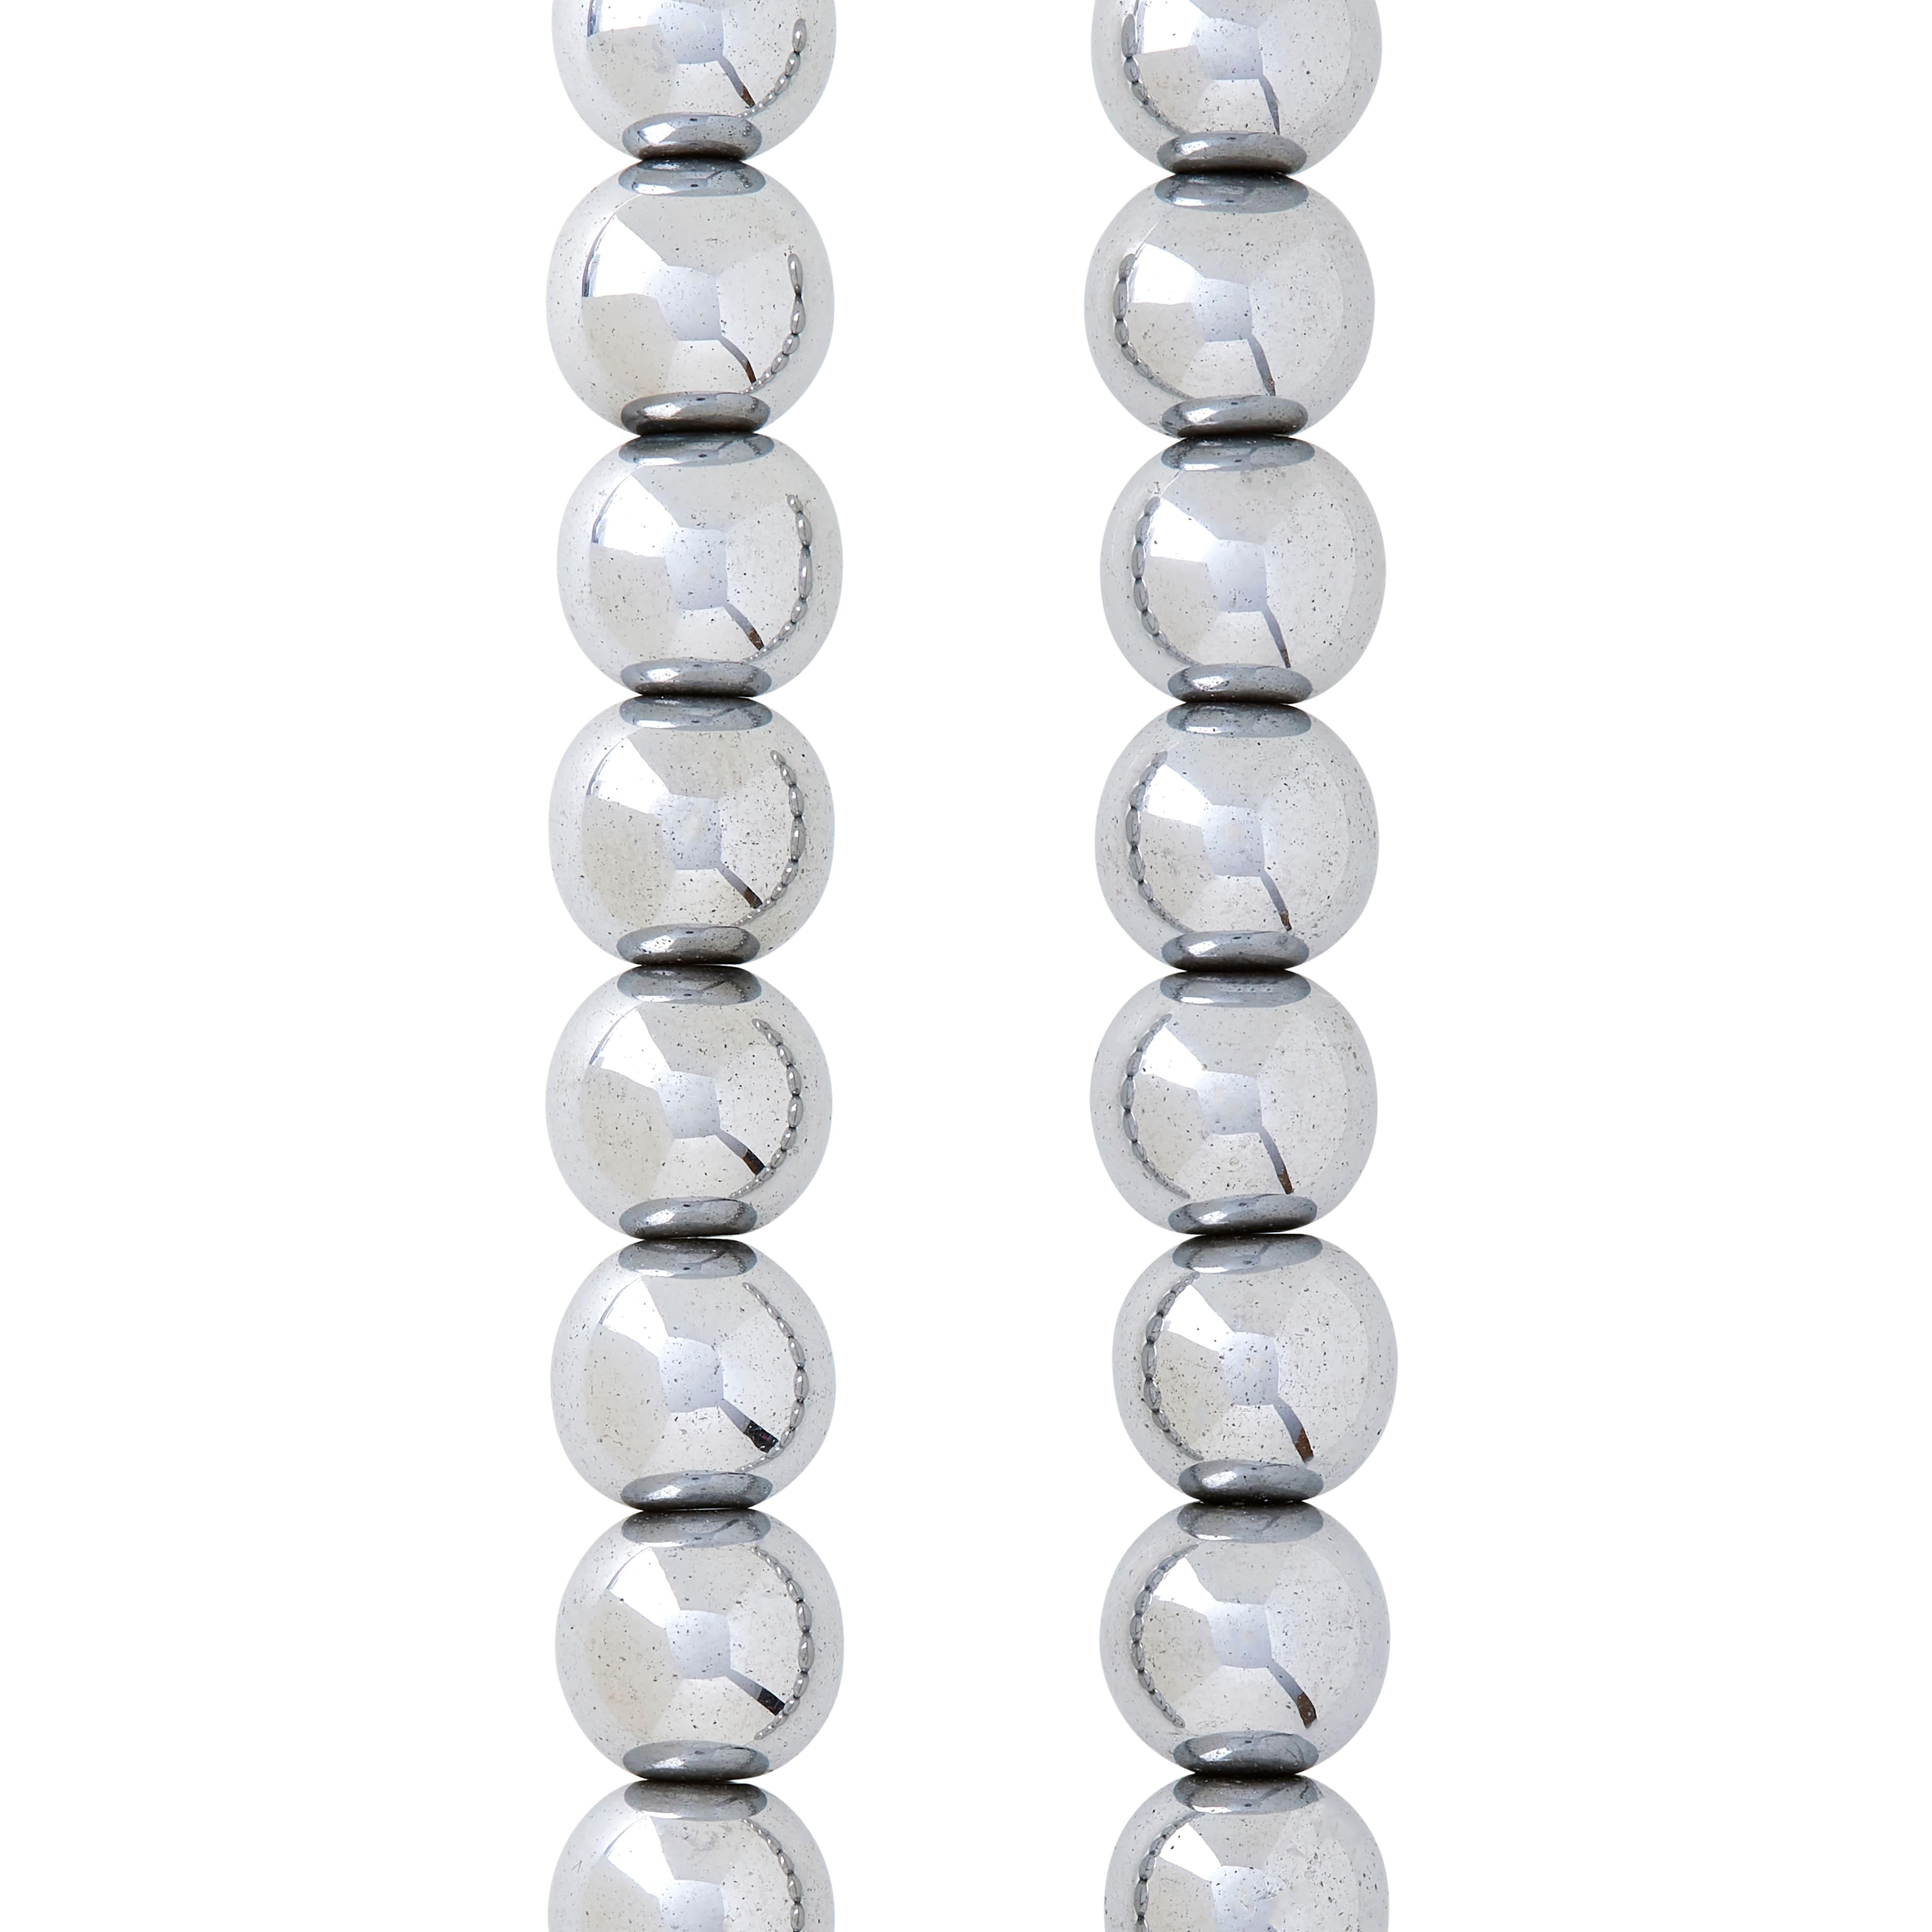 10mm beads Earrings in silver and hematite